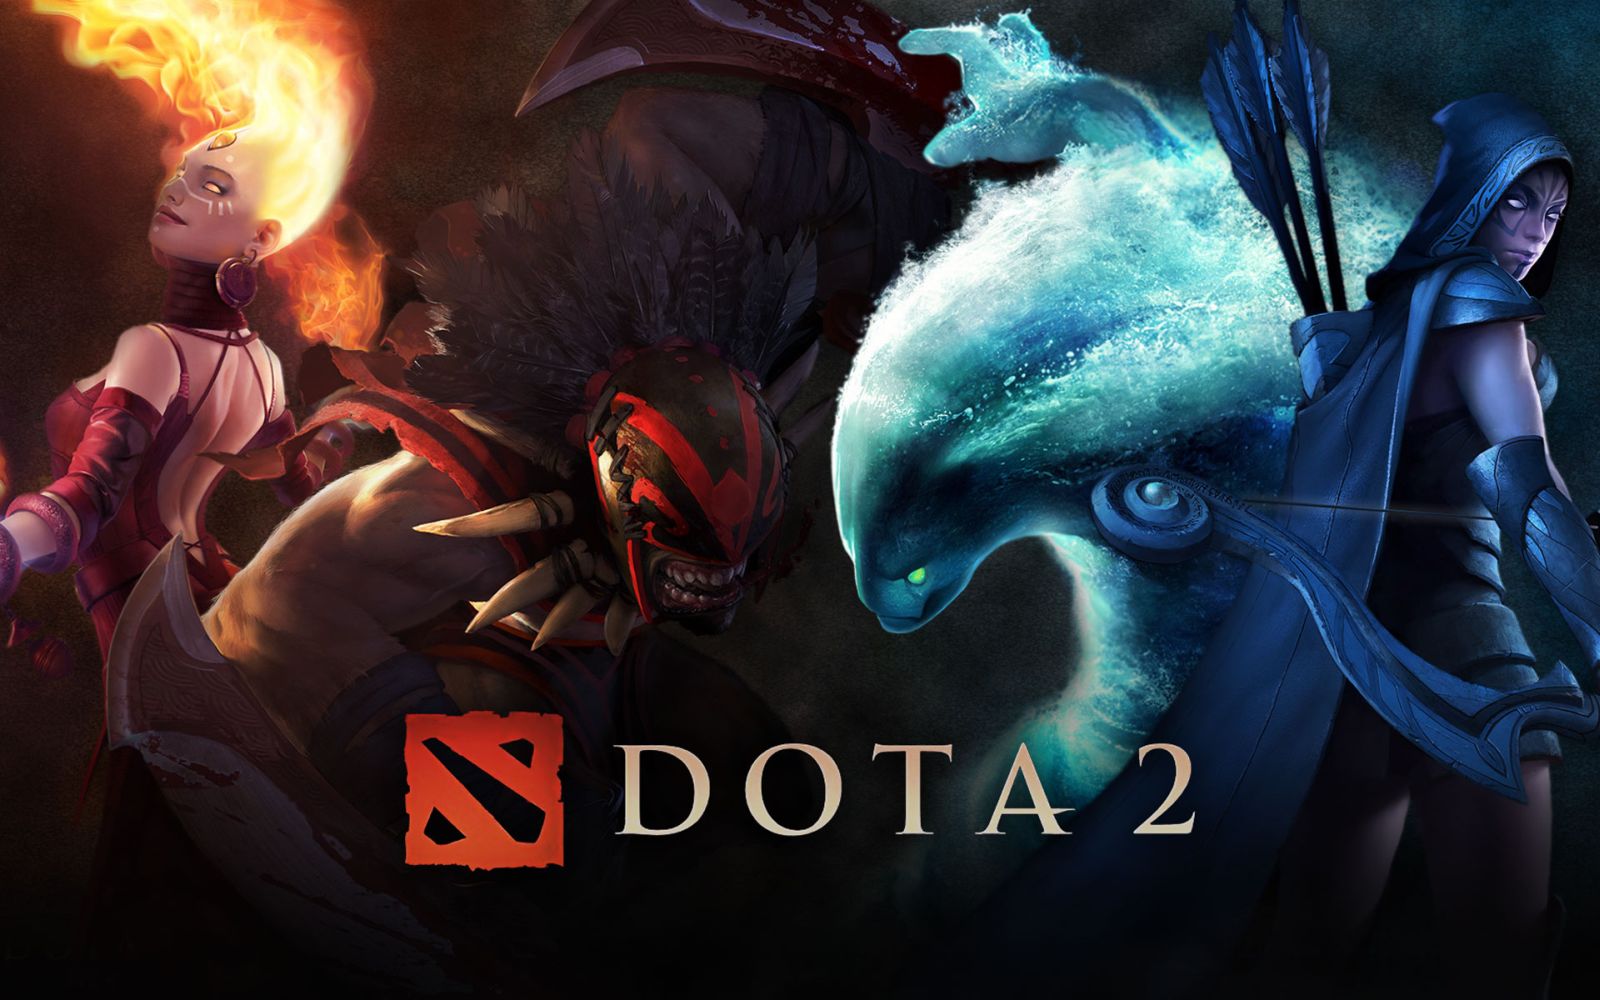 10 years since its release, DOTA 2 is addressing fairness by banning 90,000 smurf accounts. Photo courtesy of Steam